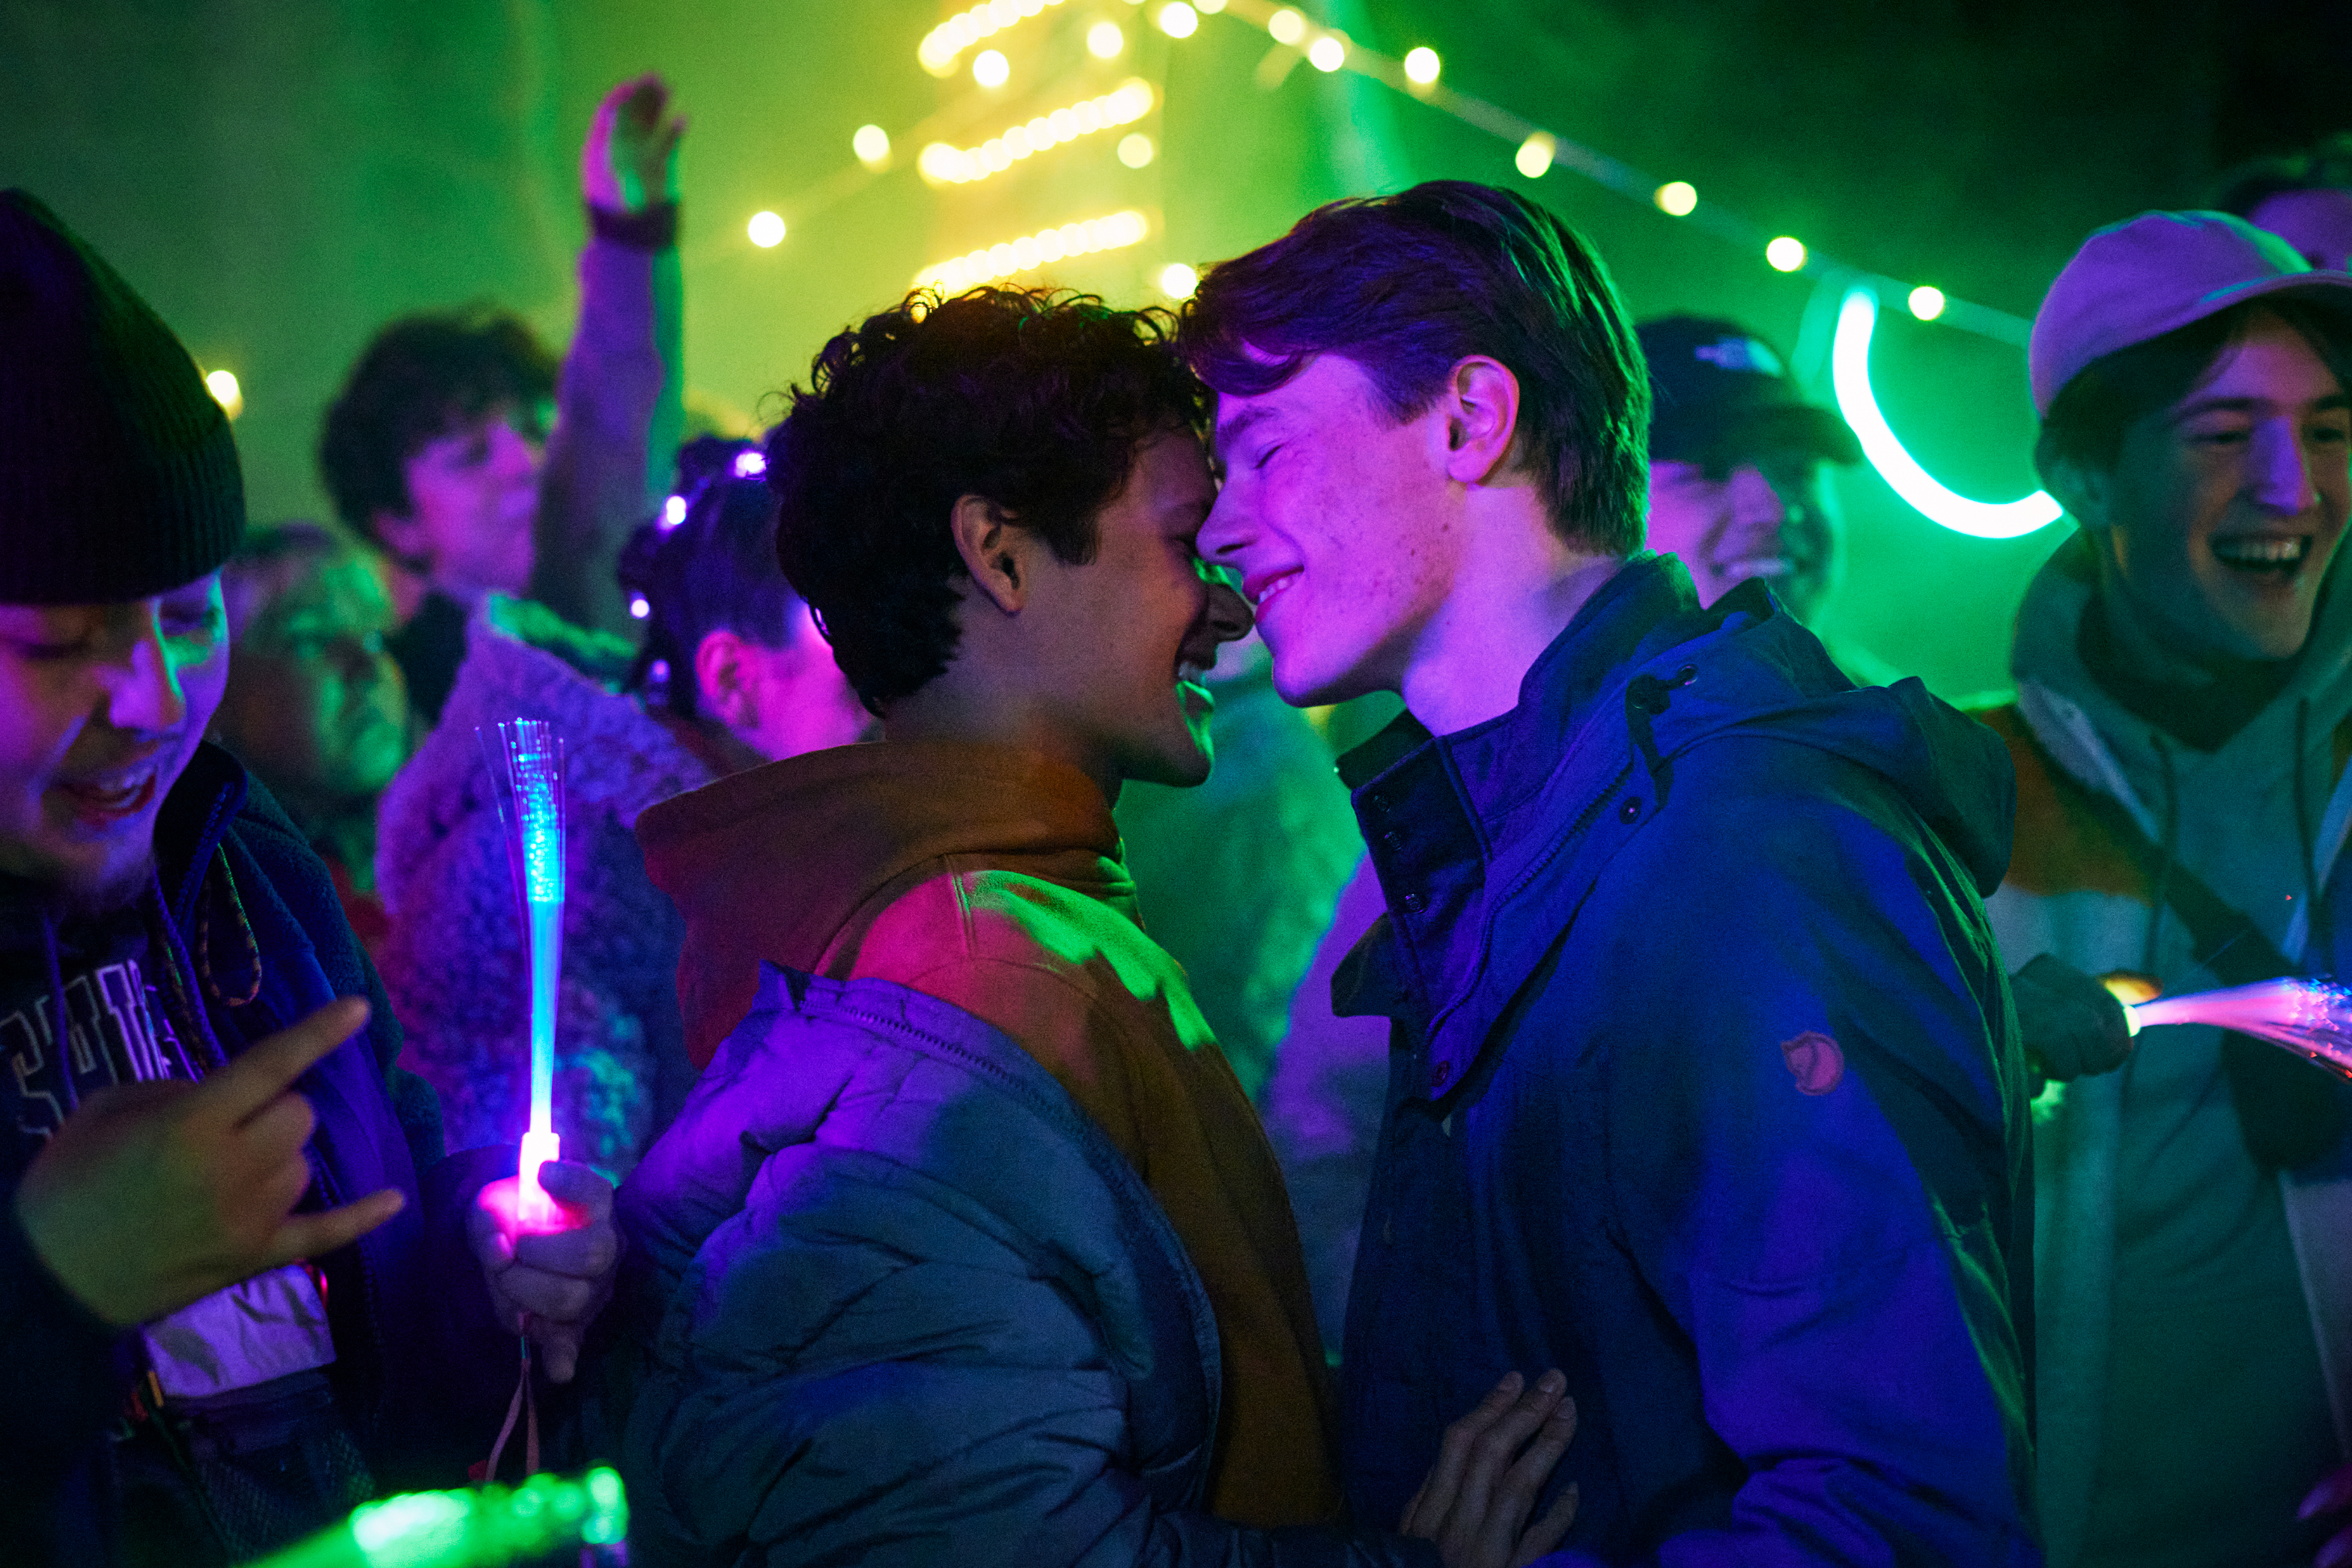 Two actors in a close moment on a TV show set with extras and neon lights in the background